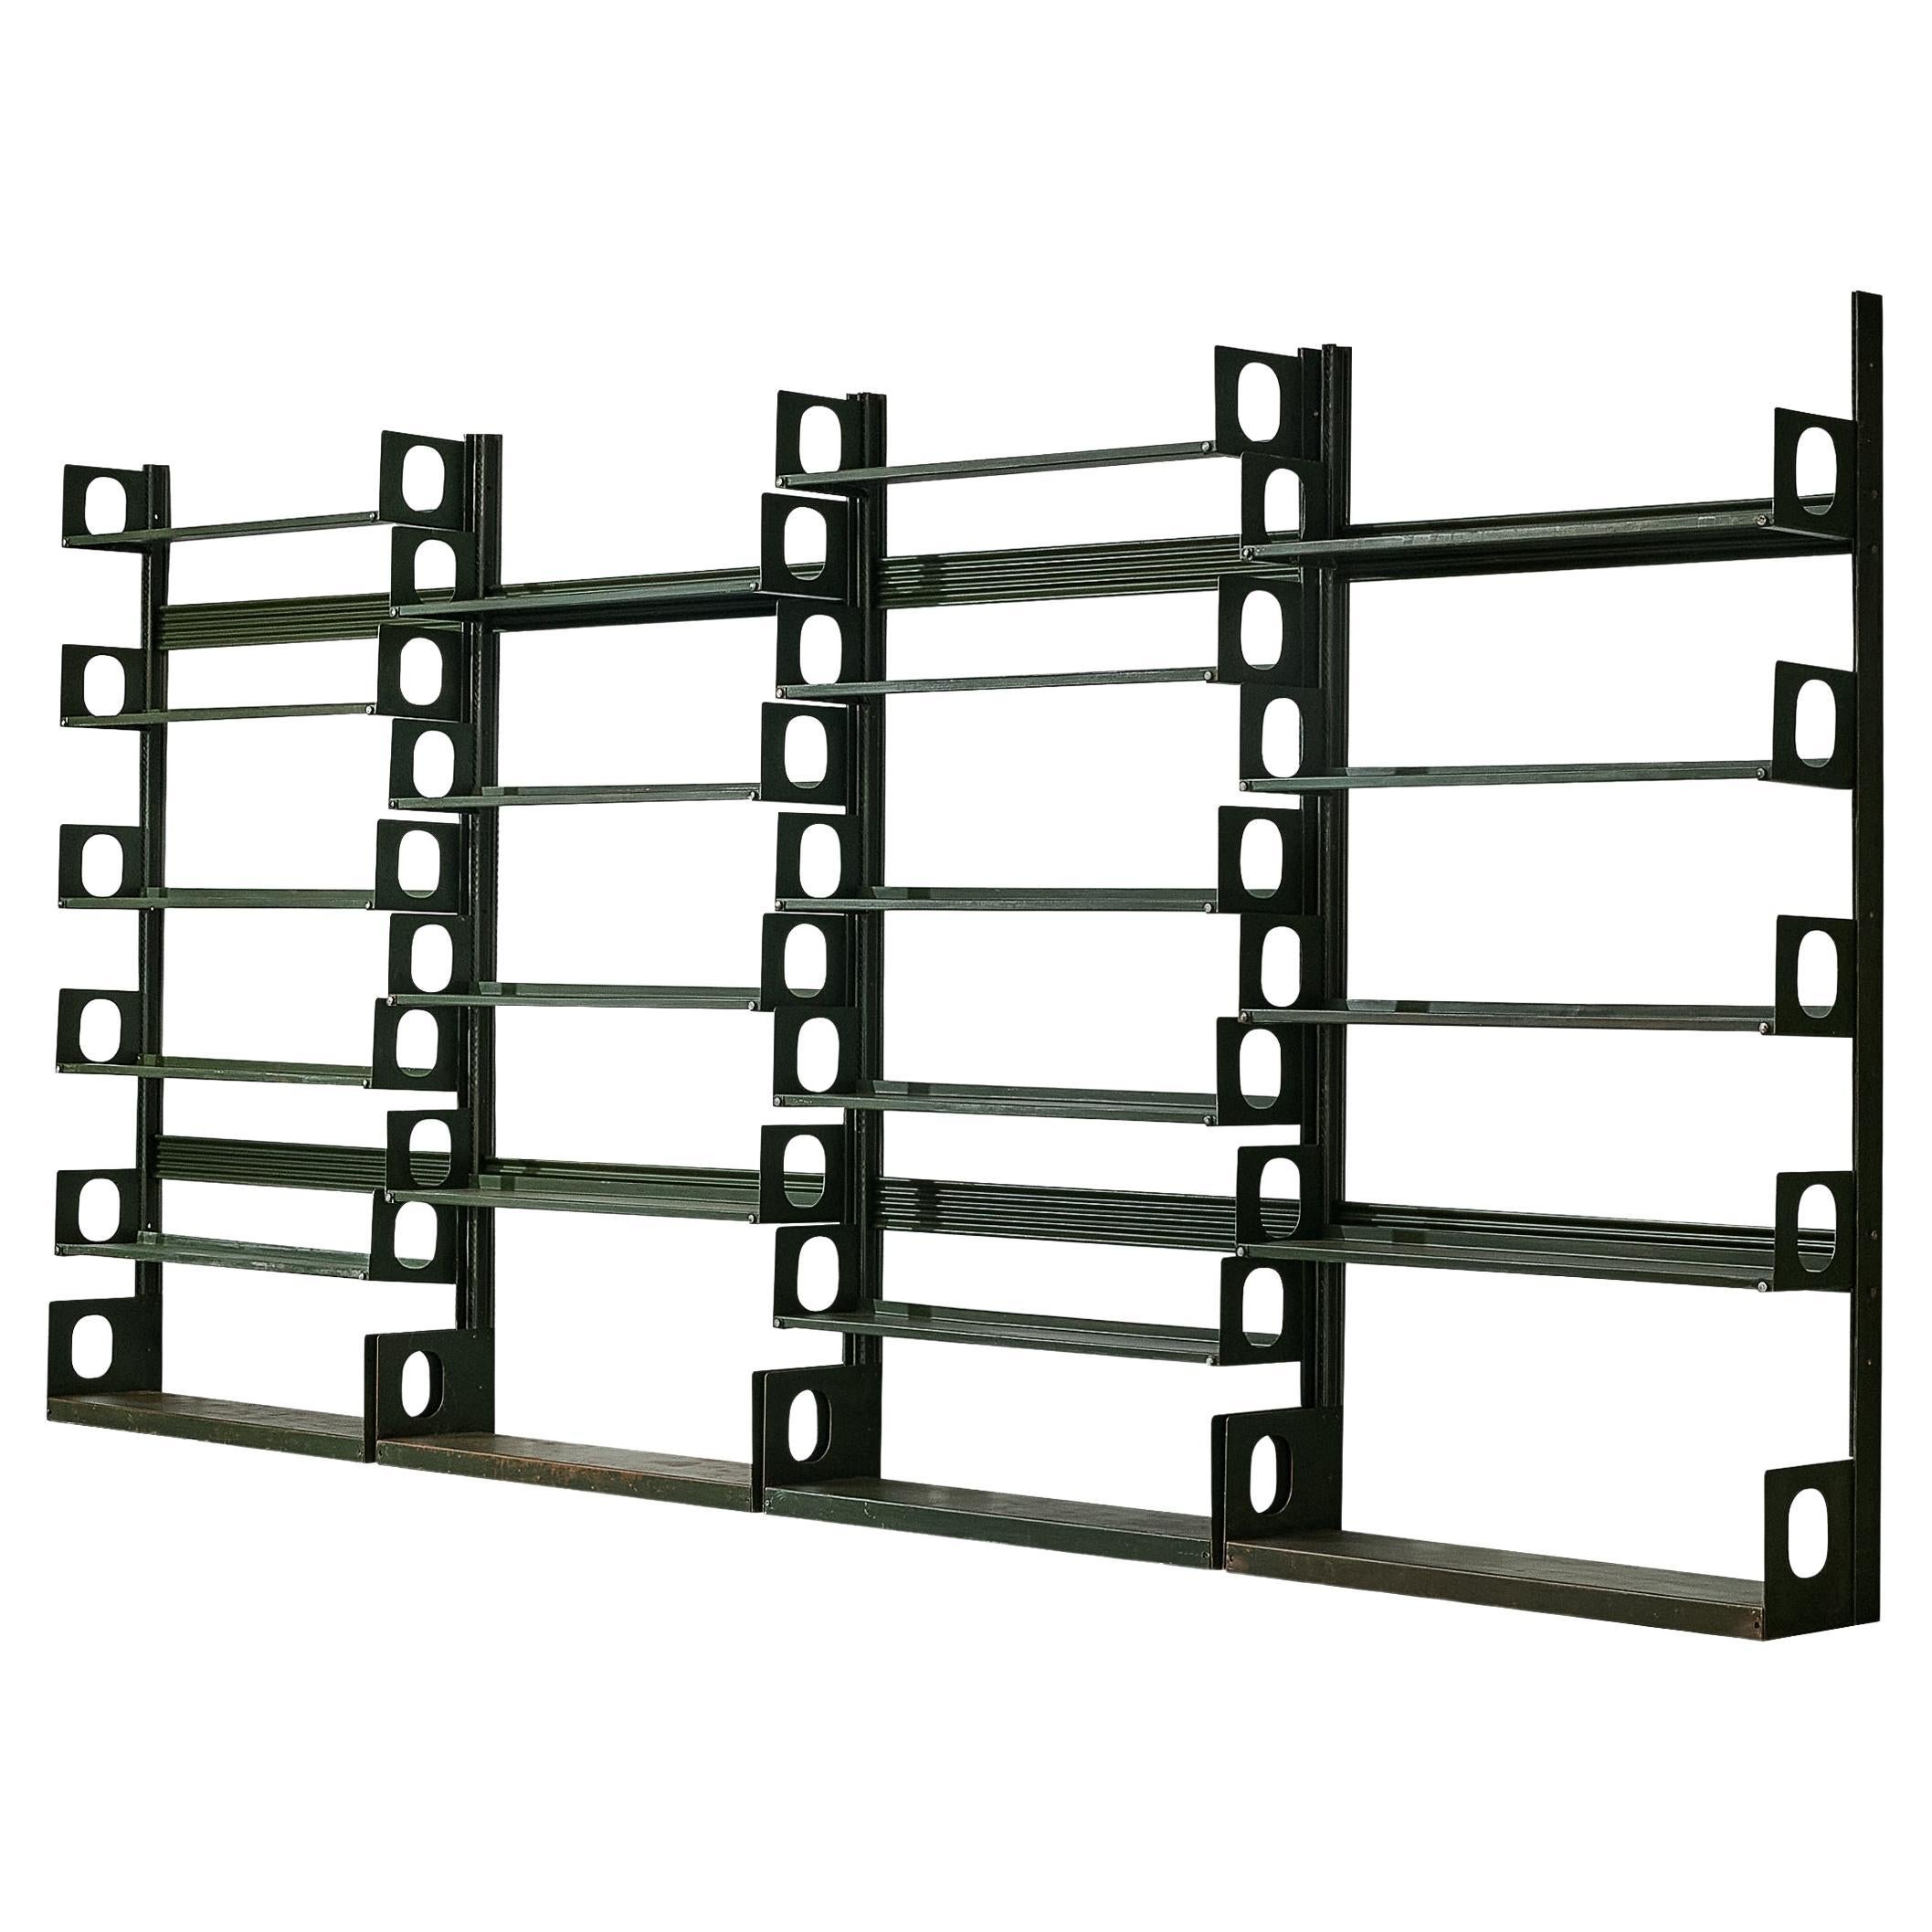 Lips Vago 'Triennal' Bookcases or Shelving System  For Sale